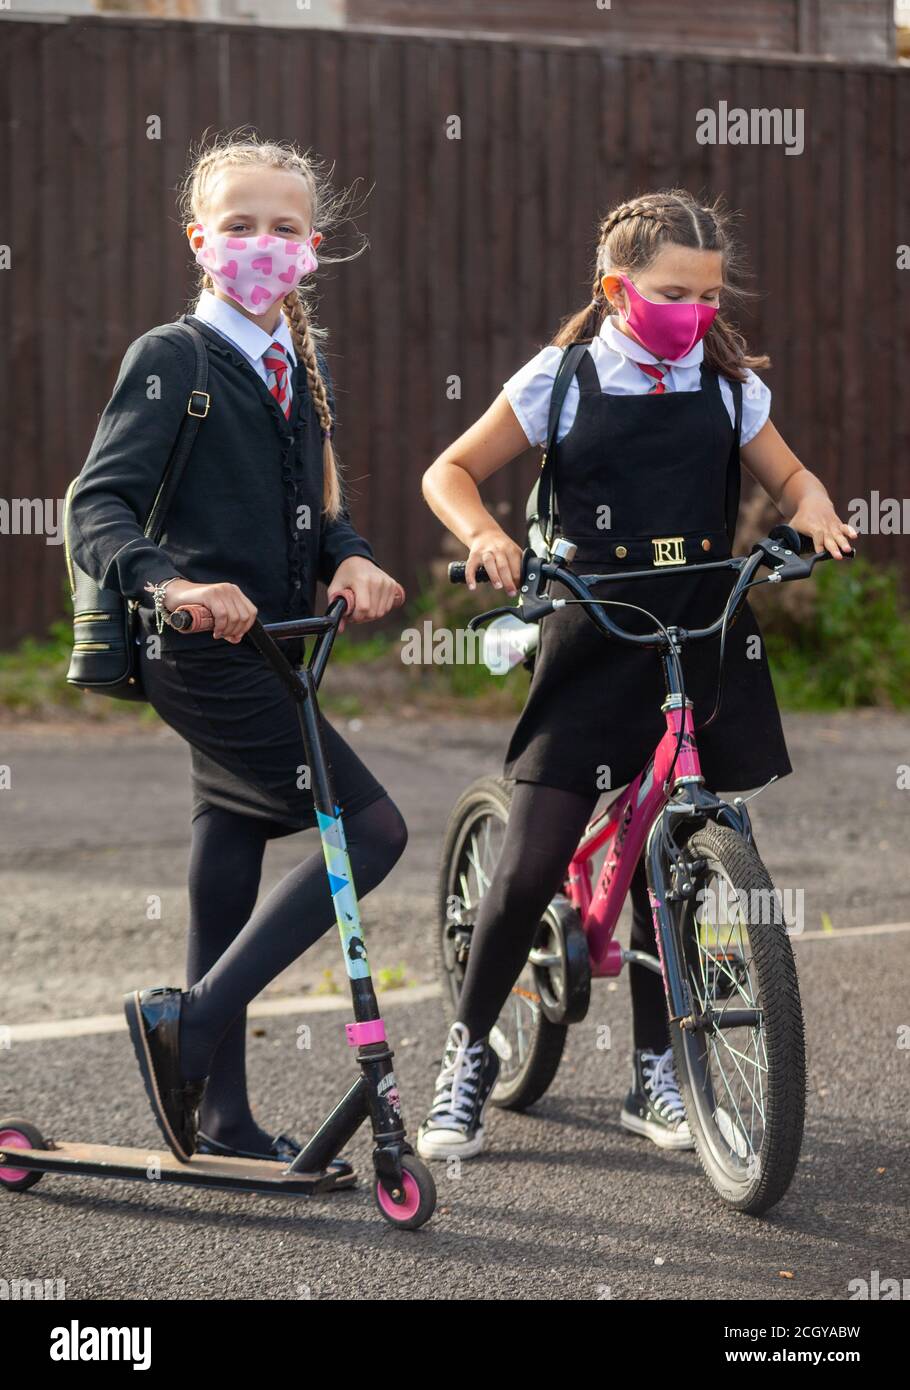 Two schoolgirls in school uniform standing with their bike and scooter and wearing face masks. Stock Photo